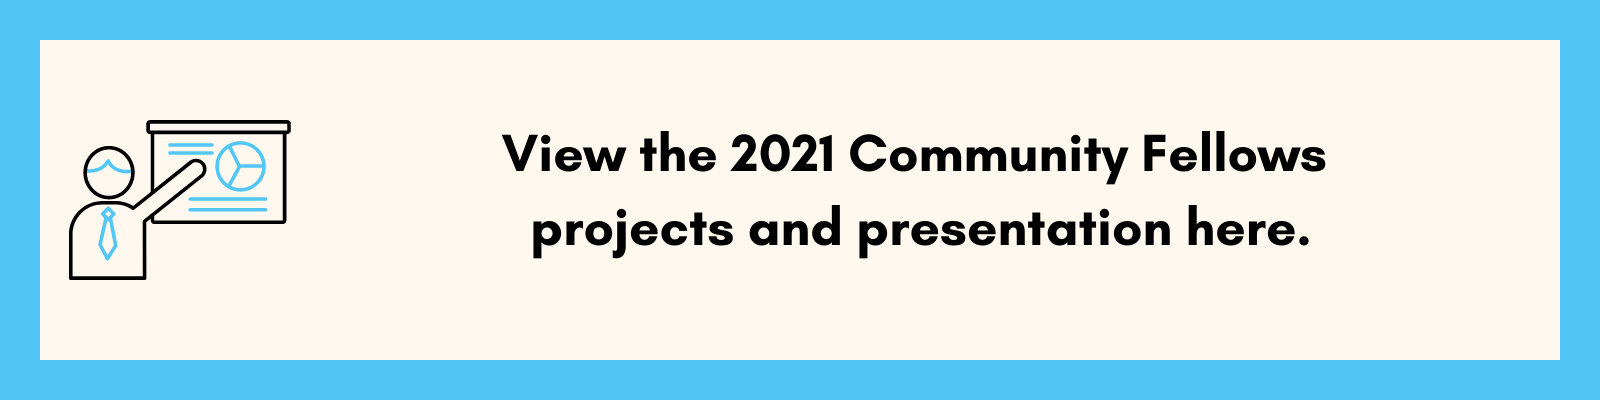 Click here to view 2021 Community Fellows projects